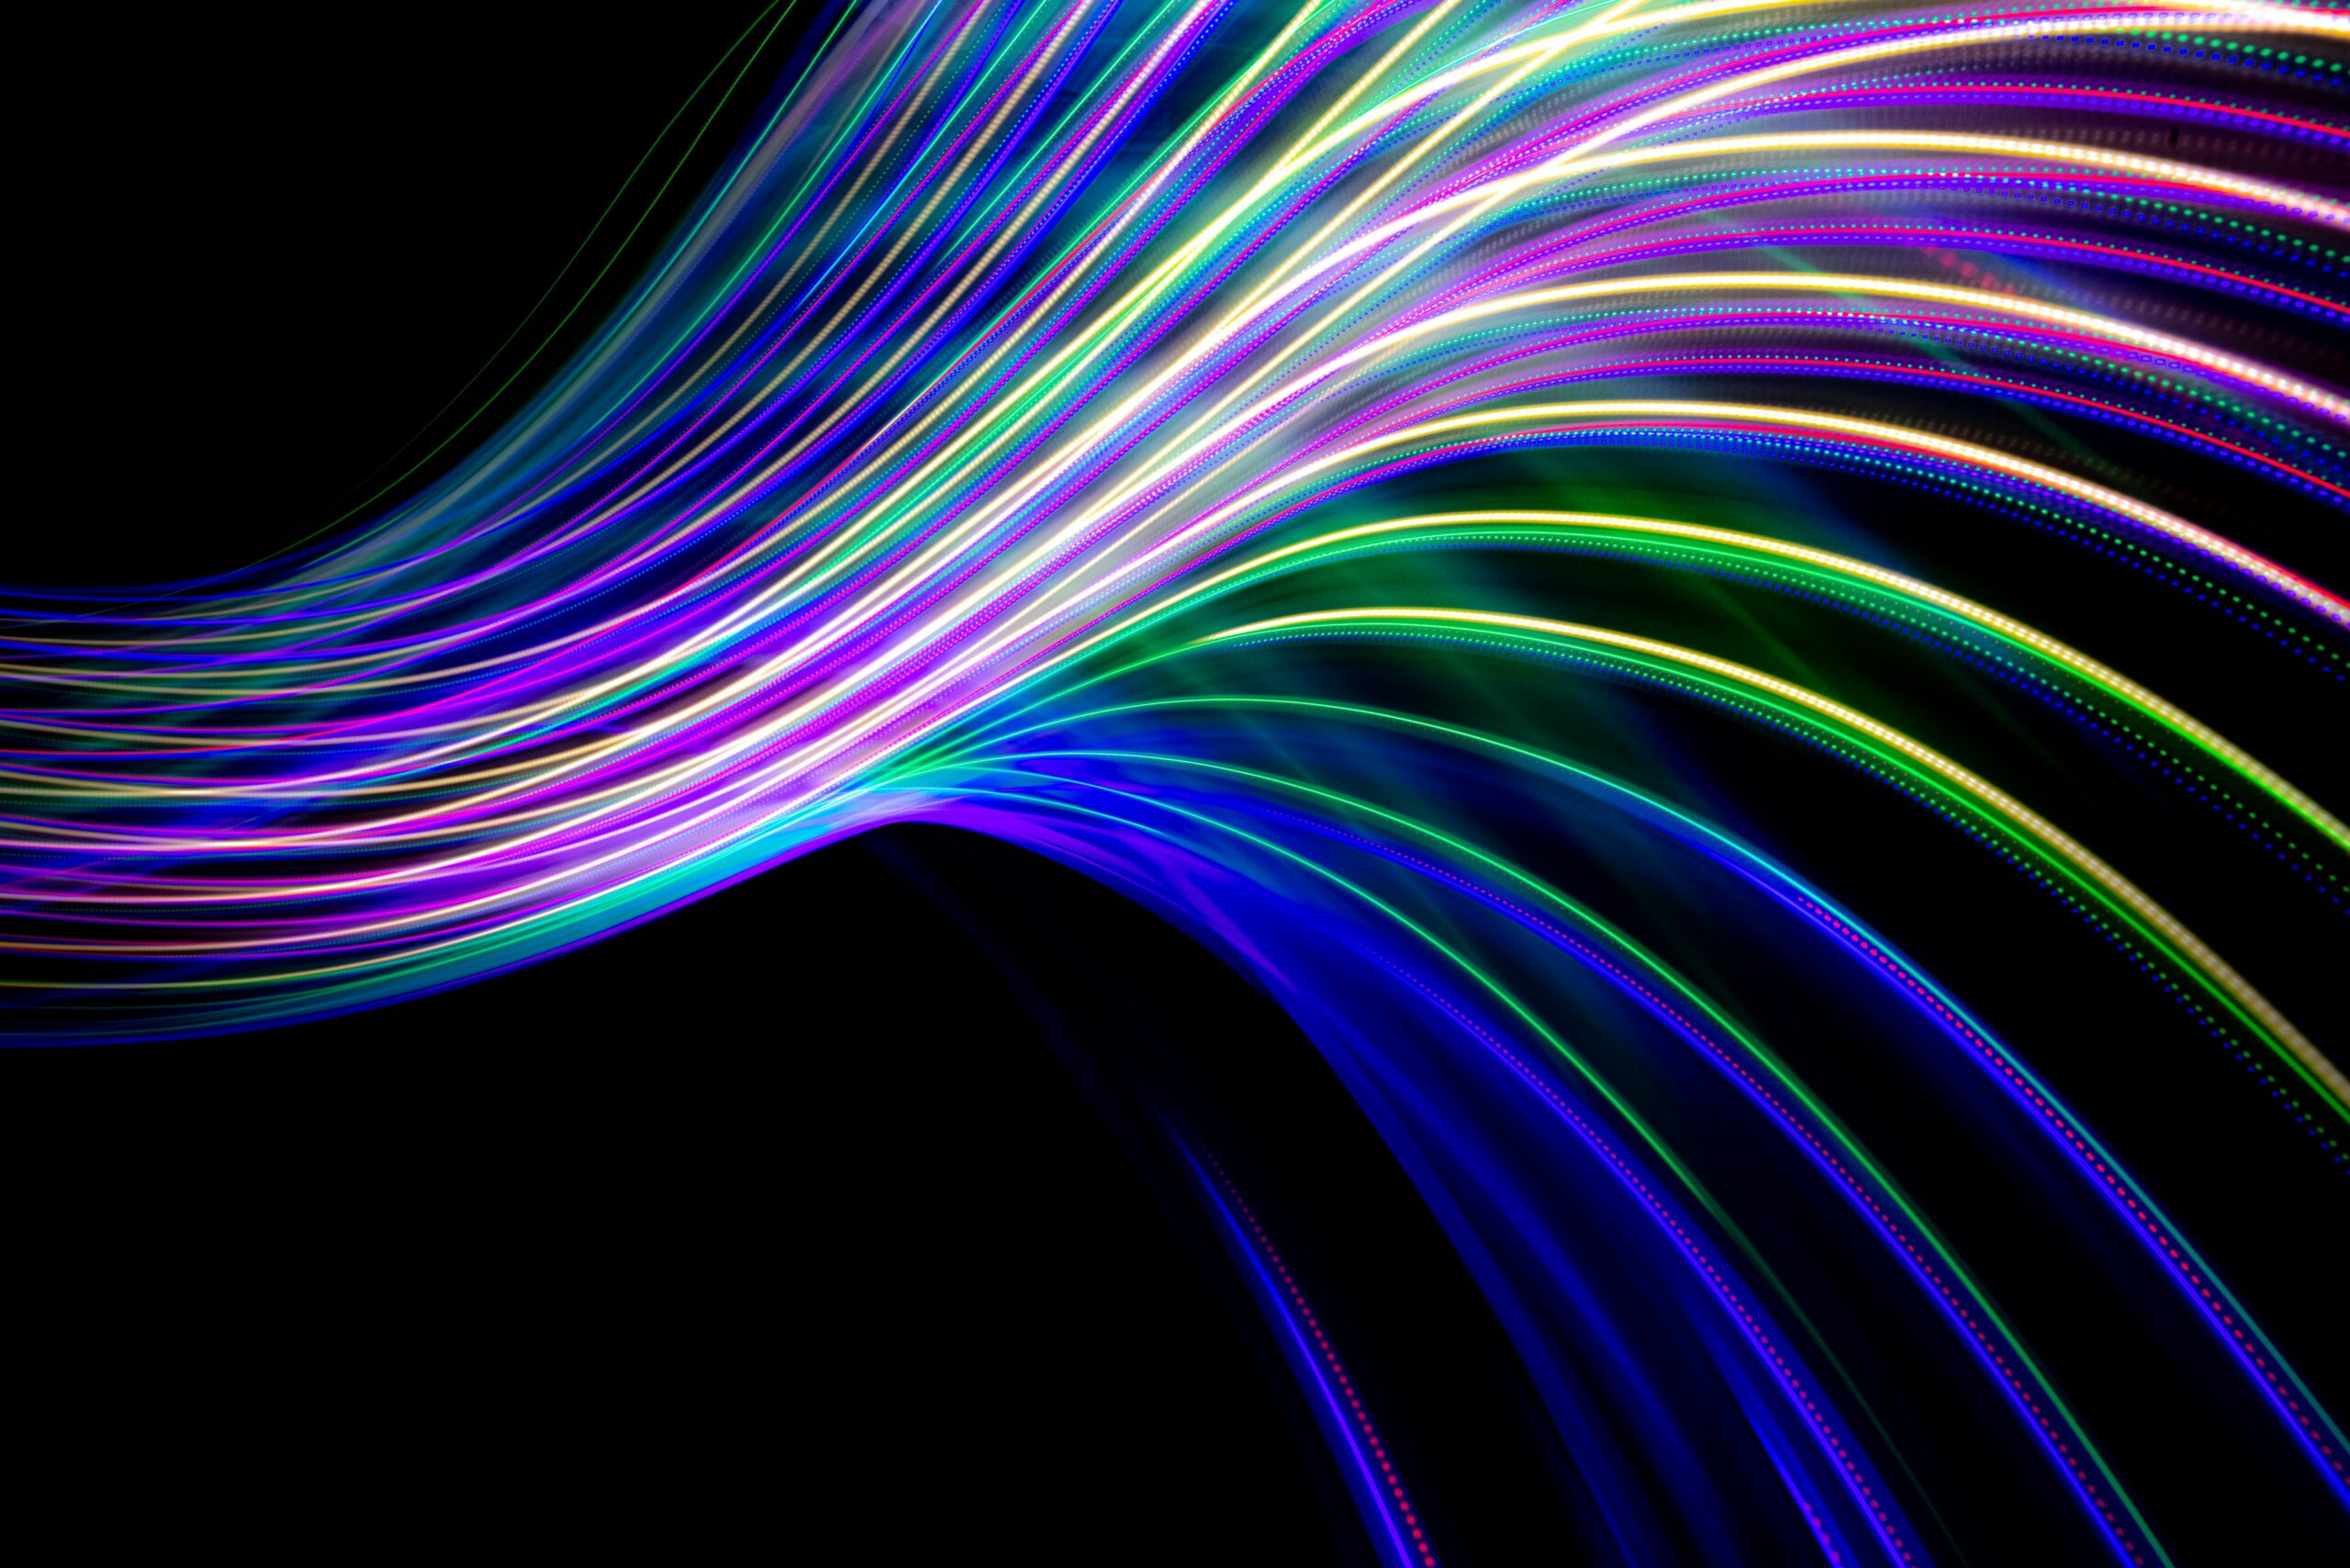 Colourful laser-link curvy lines on a black background